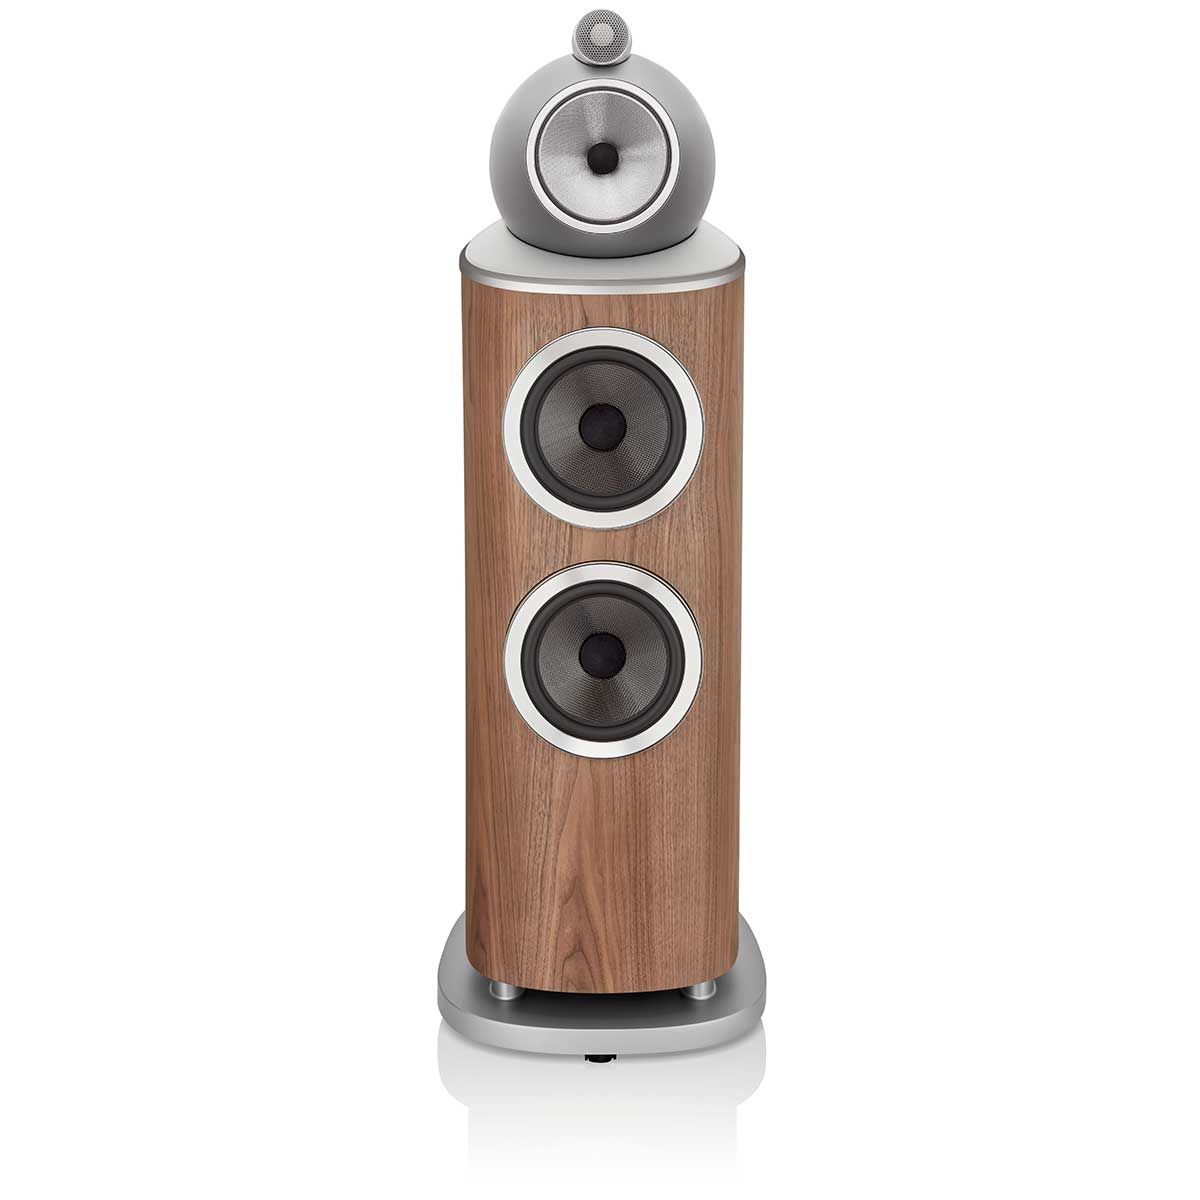 Bowers & Wilkins 802 D4 Floorstanding Speaker, Satin Walnut, front view without grille